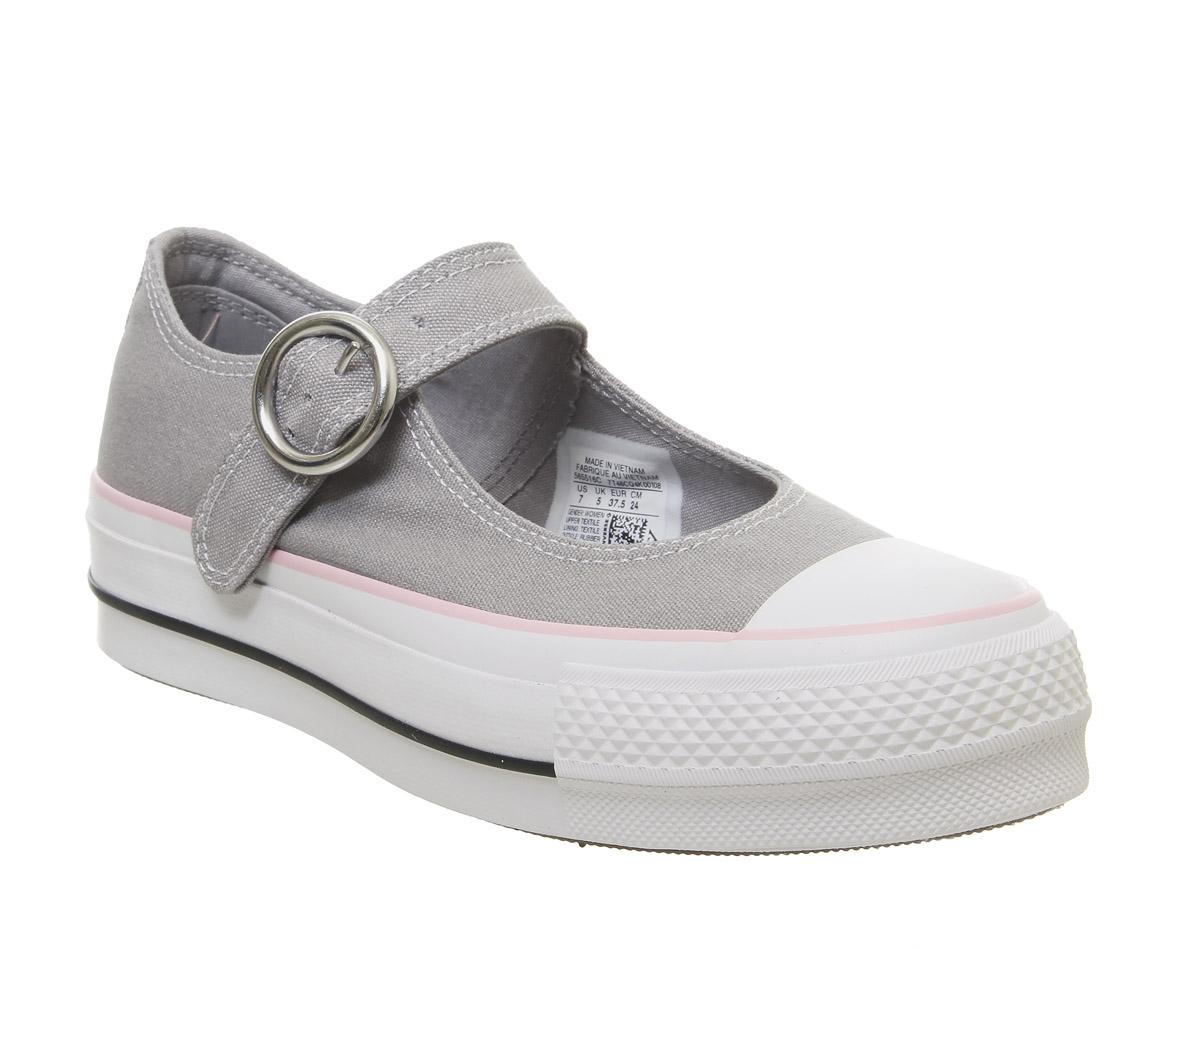 ConverseAll Star Mary Jane Ox TrainersGrey Pink White Exclusive